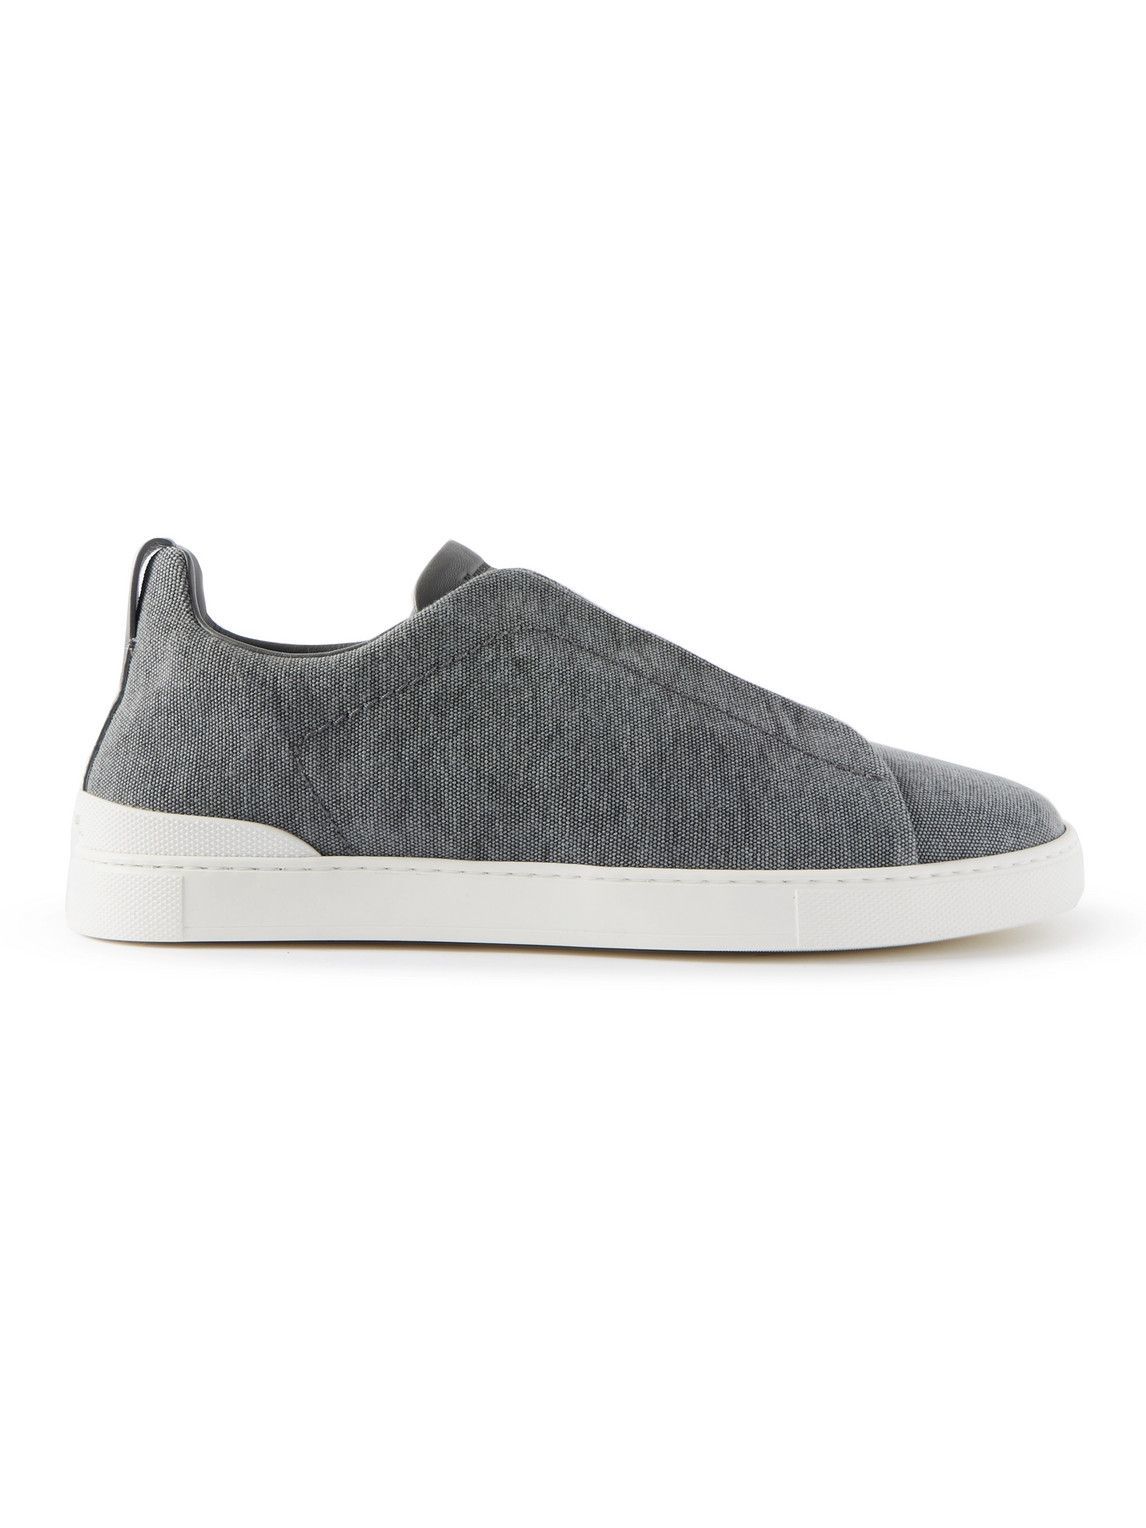 Zegna - Triple Stitch Leather-Trimmed Canvas Sneakers - Gray